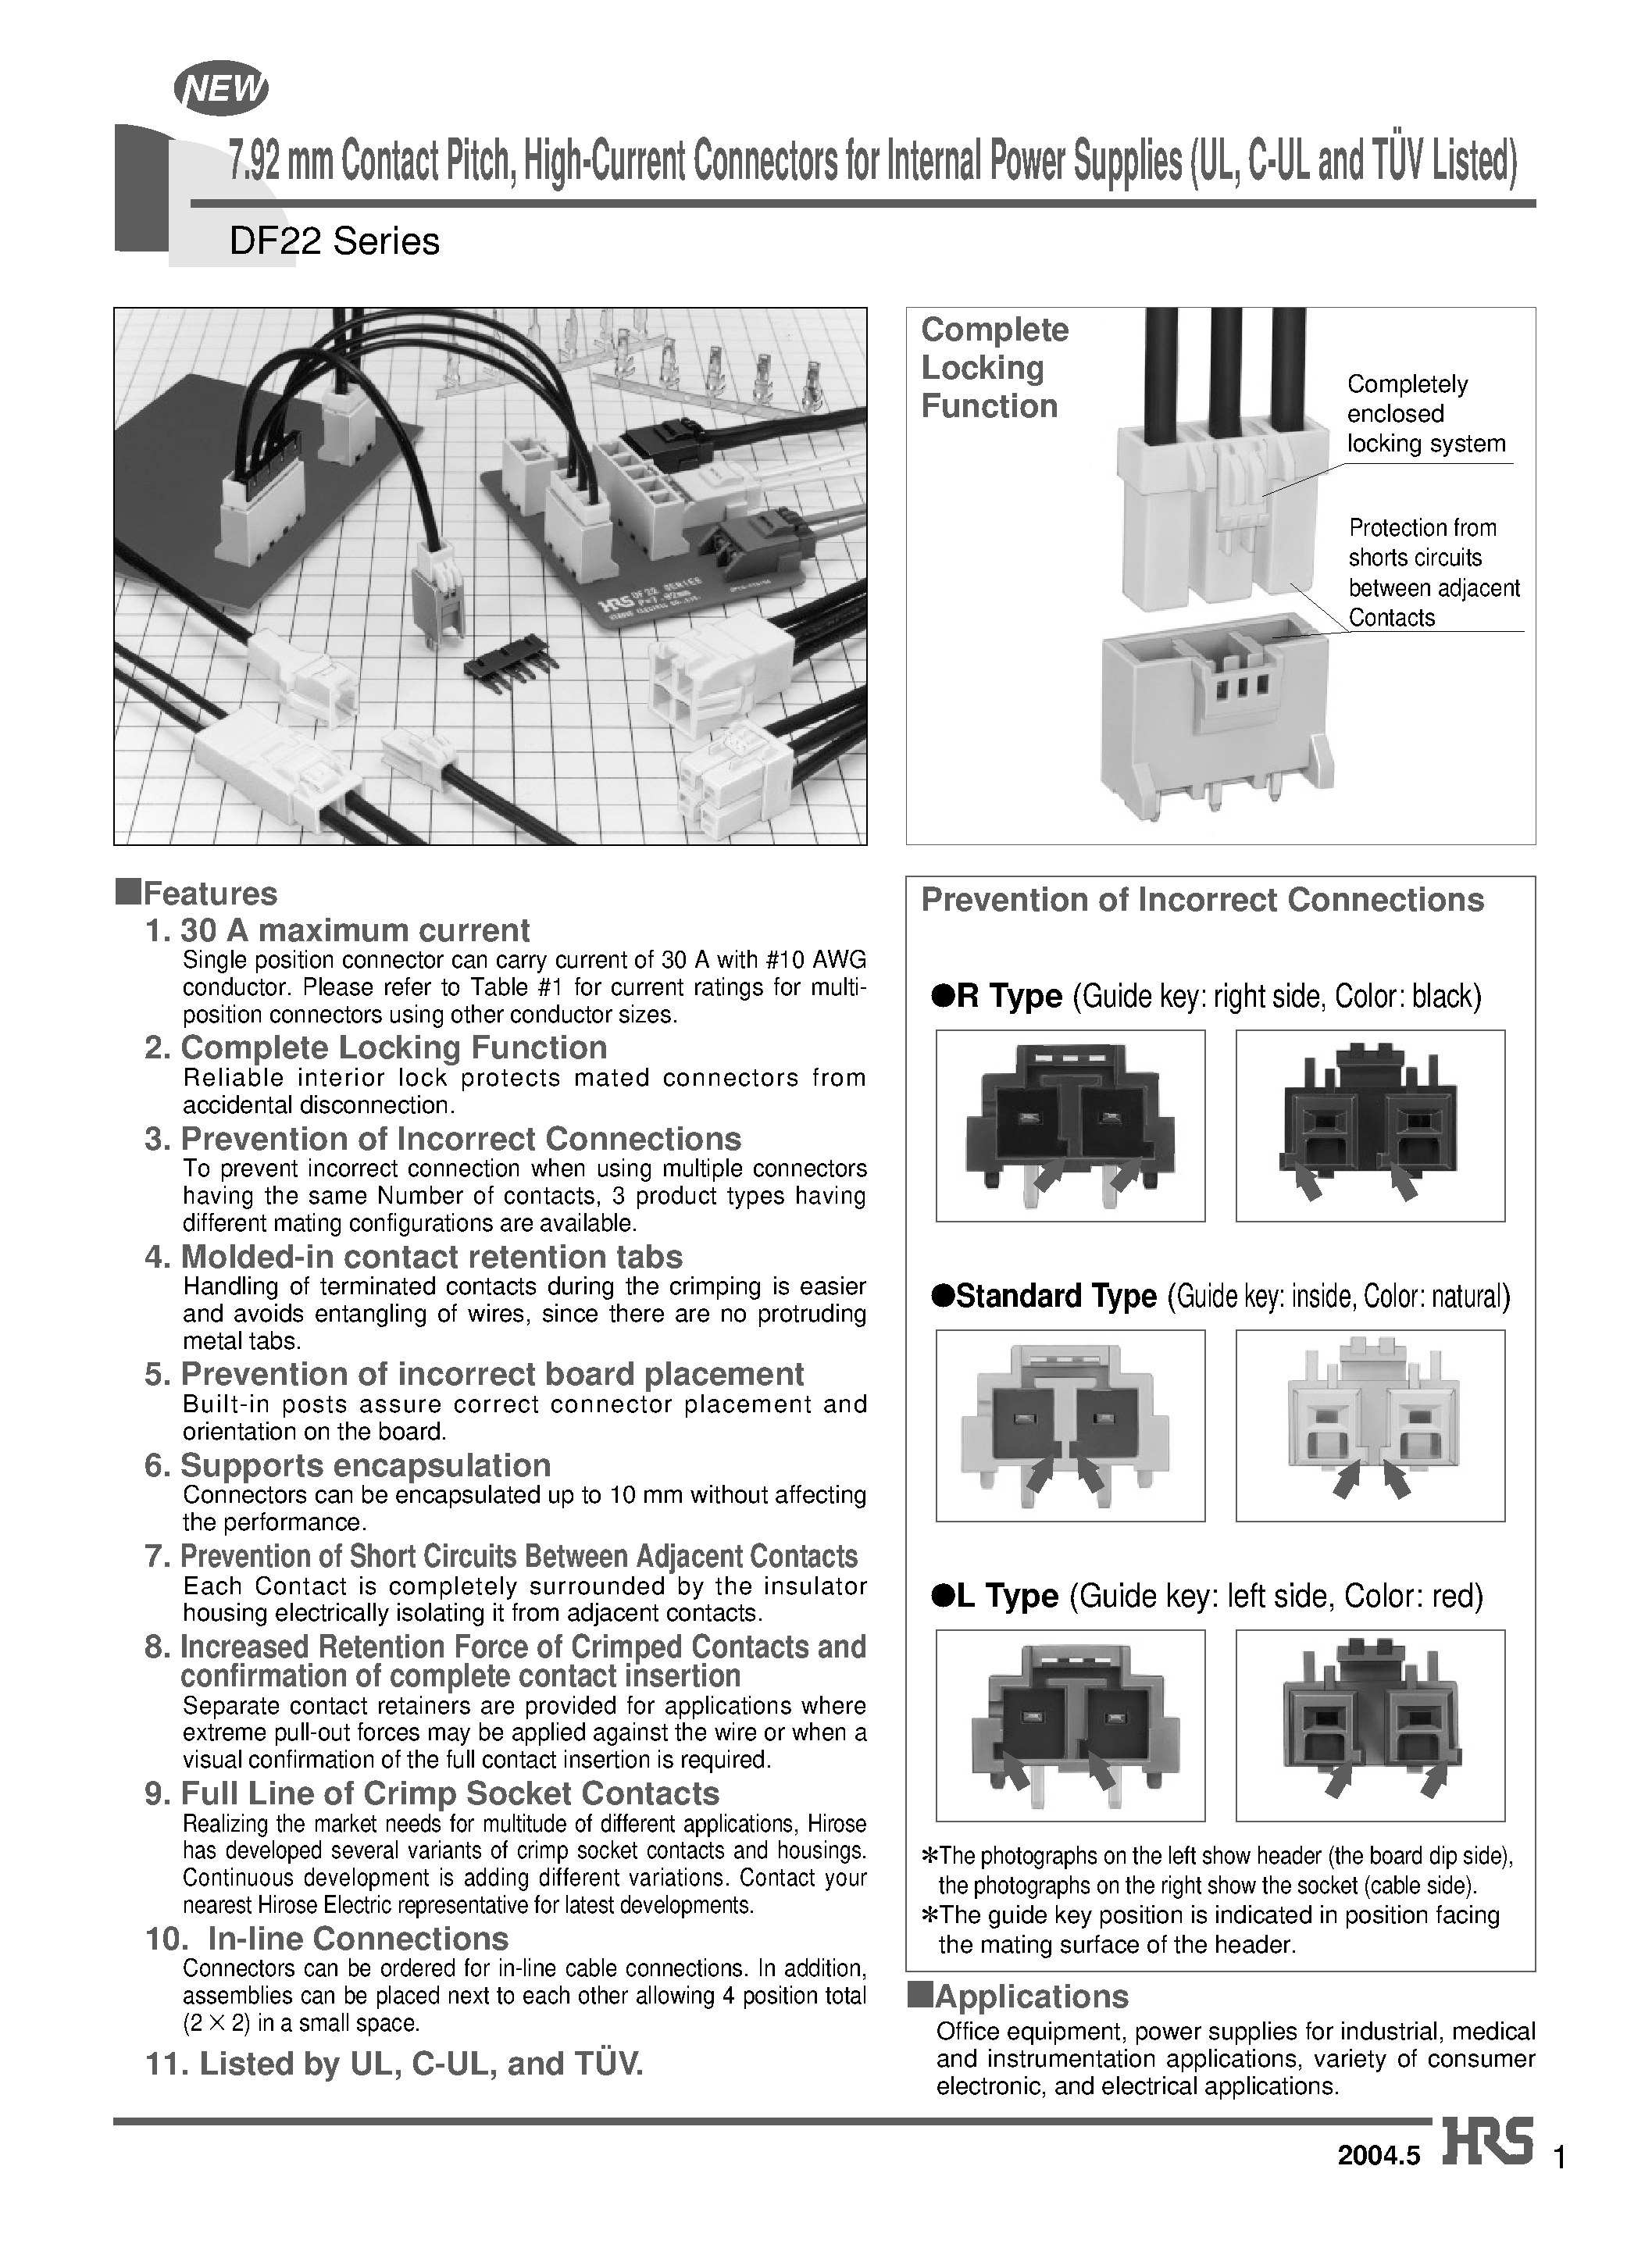 Даташит DF22A-5S-7.92DSA - 7.92 mm Contact Pitch/ High-Current Connectors for Internal Power Supplies (UL/ C-UL and TUV Listed) страница 1